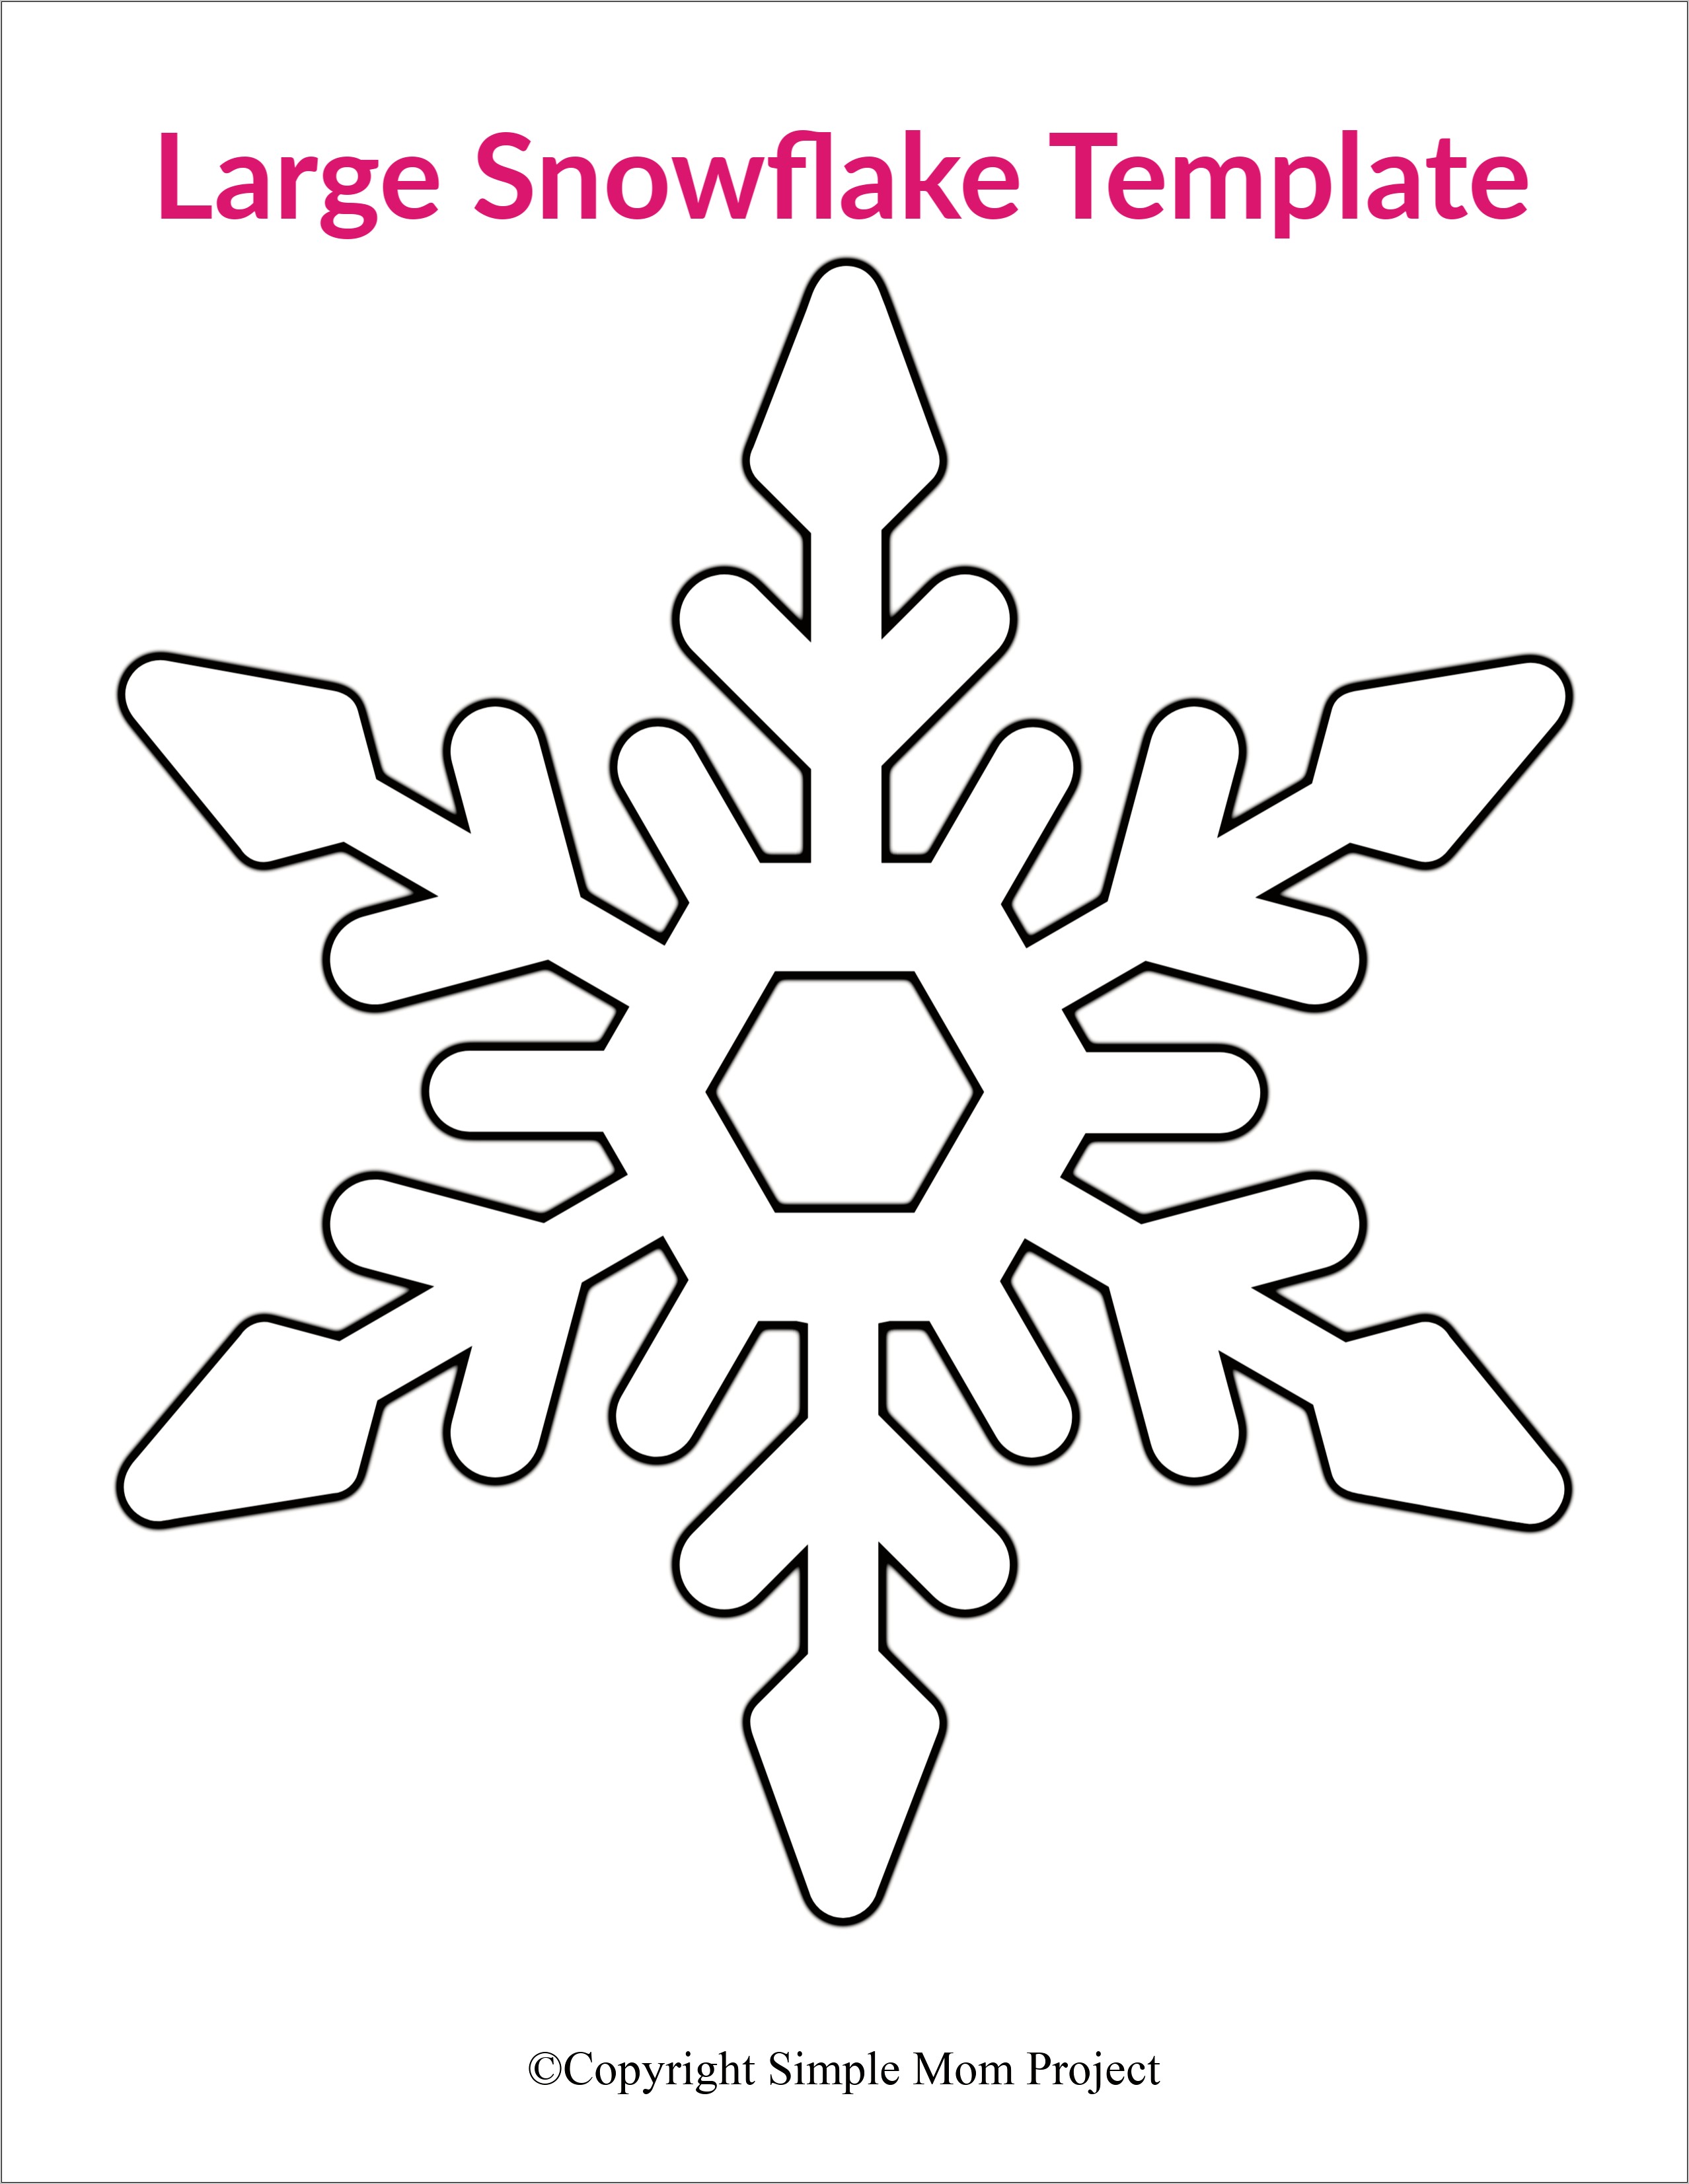 Free Snowflake Templates To Cut Out